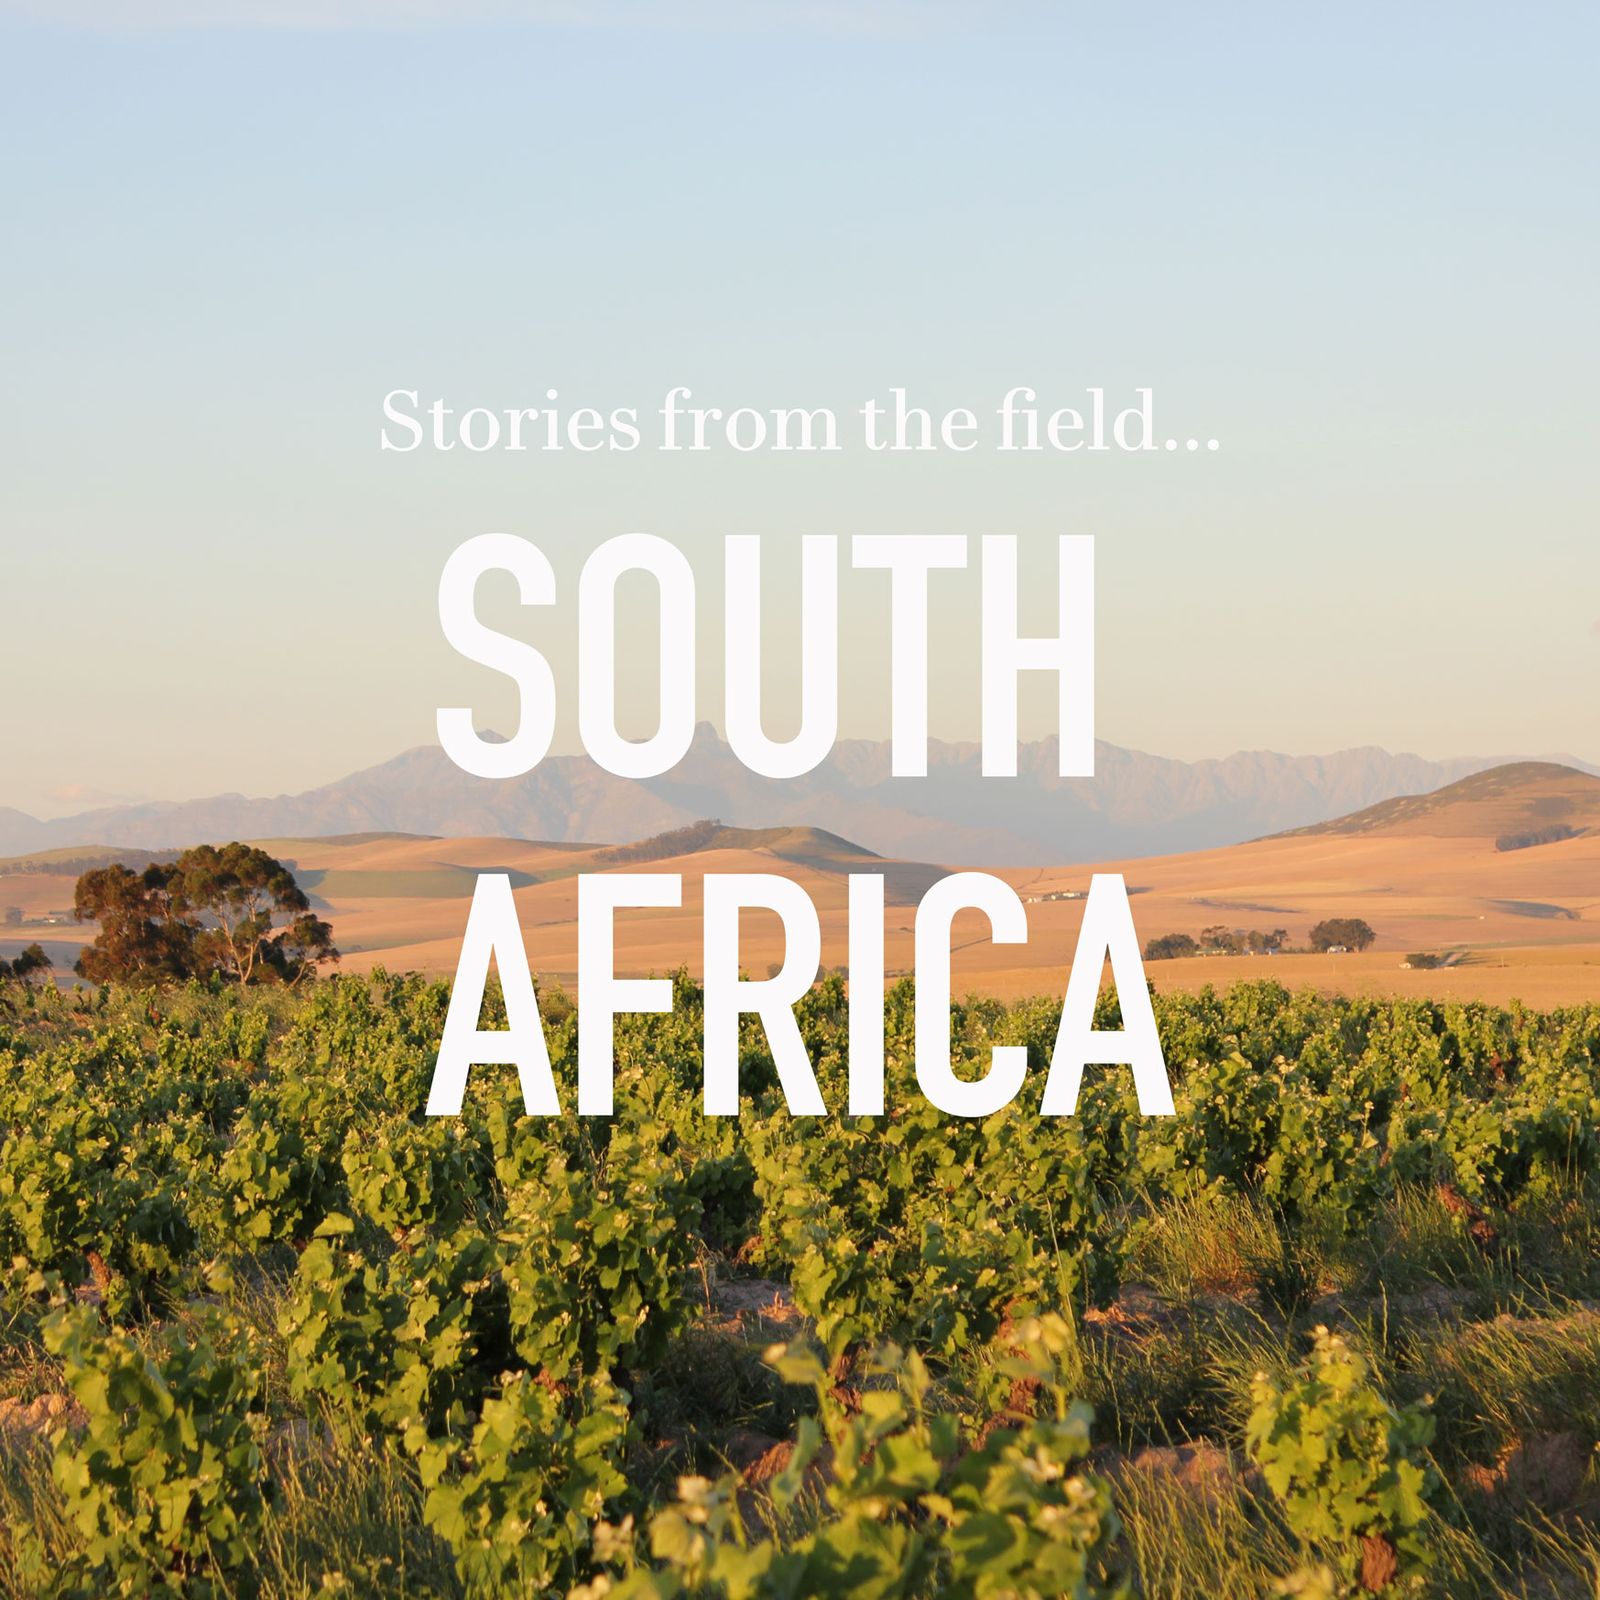 Stories from the field - South Africa